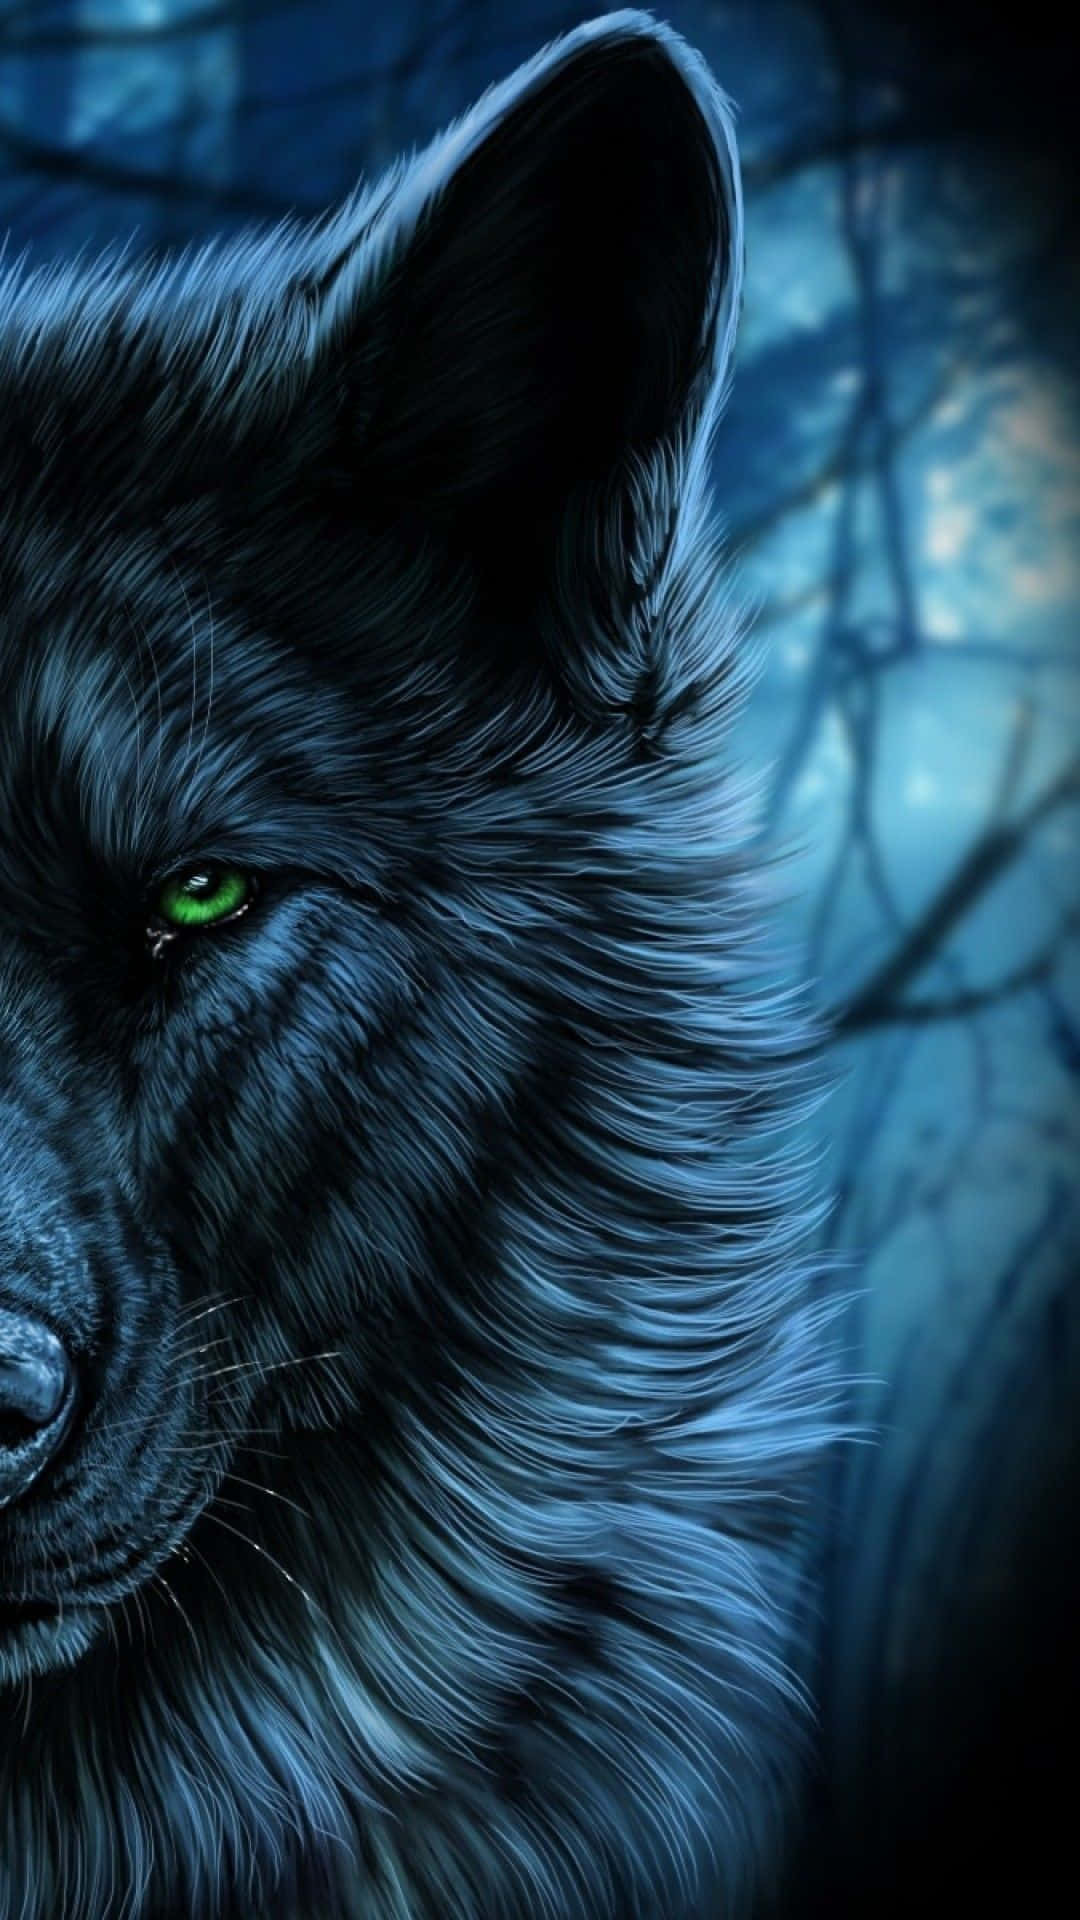 Majestic Dire Wolf Prowling in the Wild Wallpaper